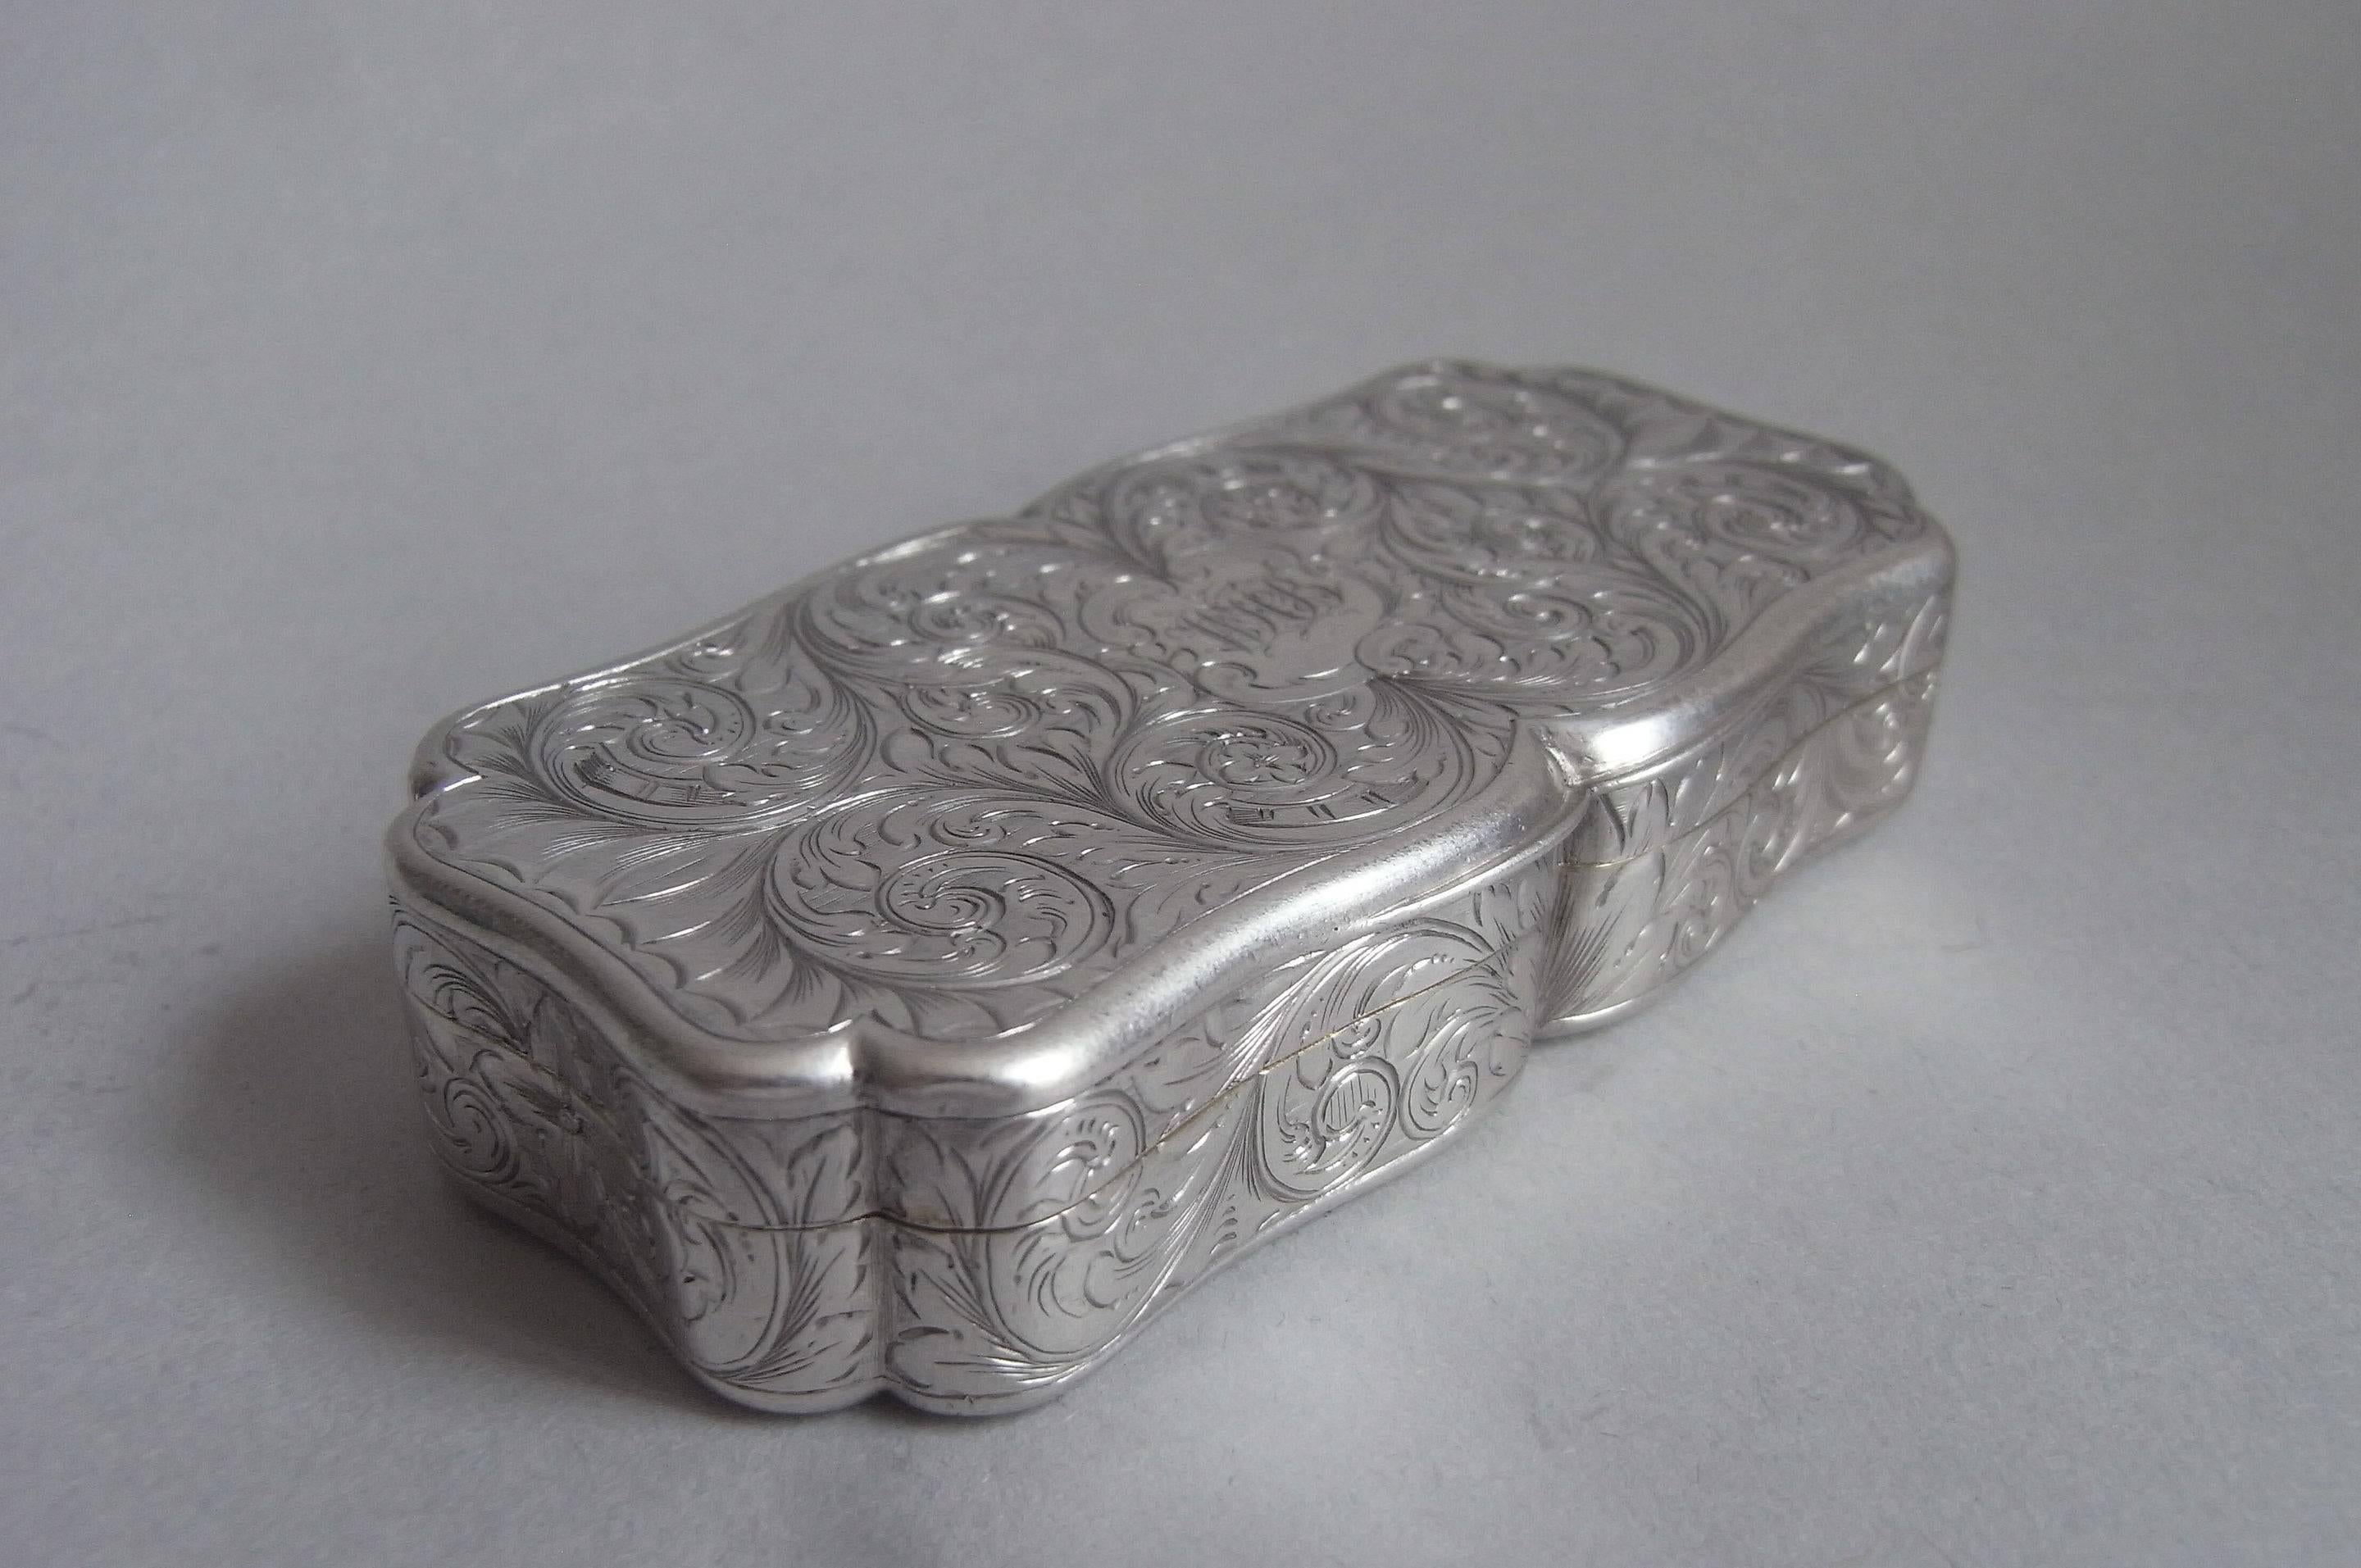 English Very Fine Pocket Snuff Box Made in Birmingham in 1840 by Nathaniel Mills